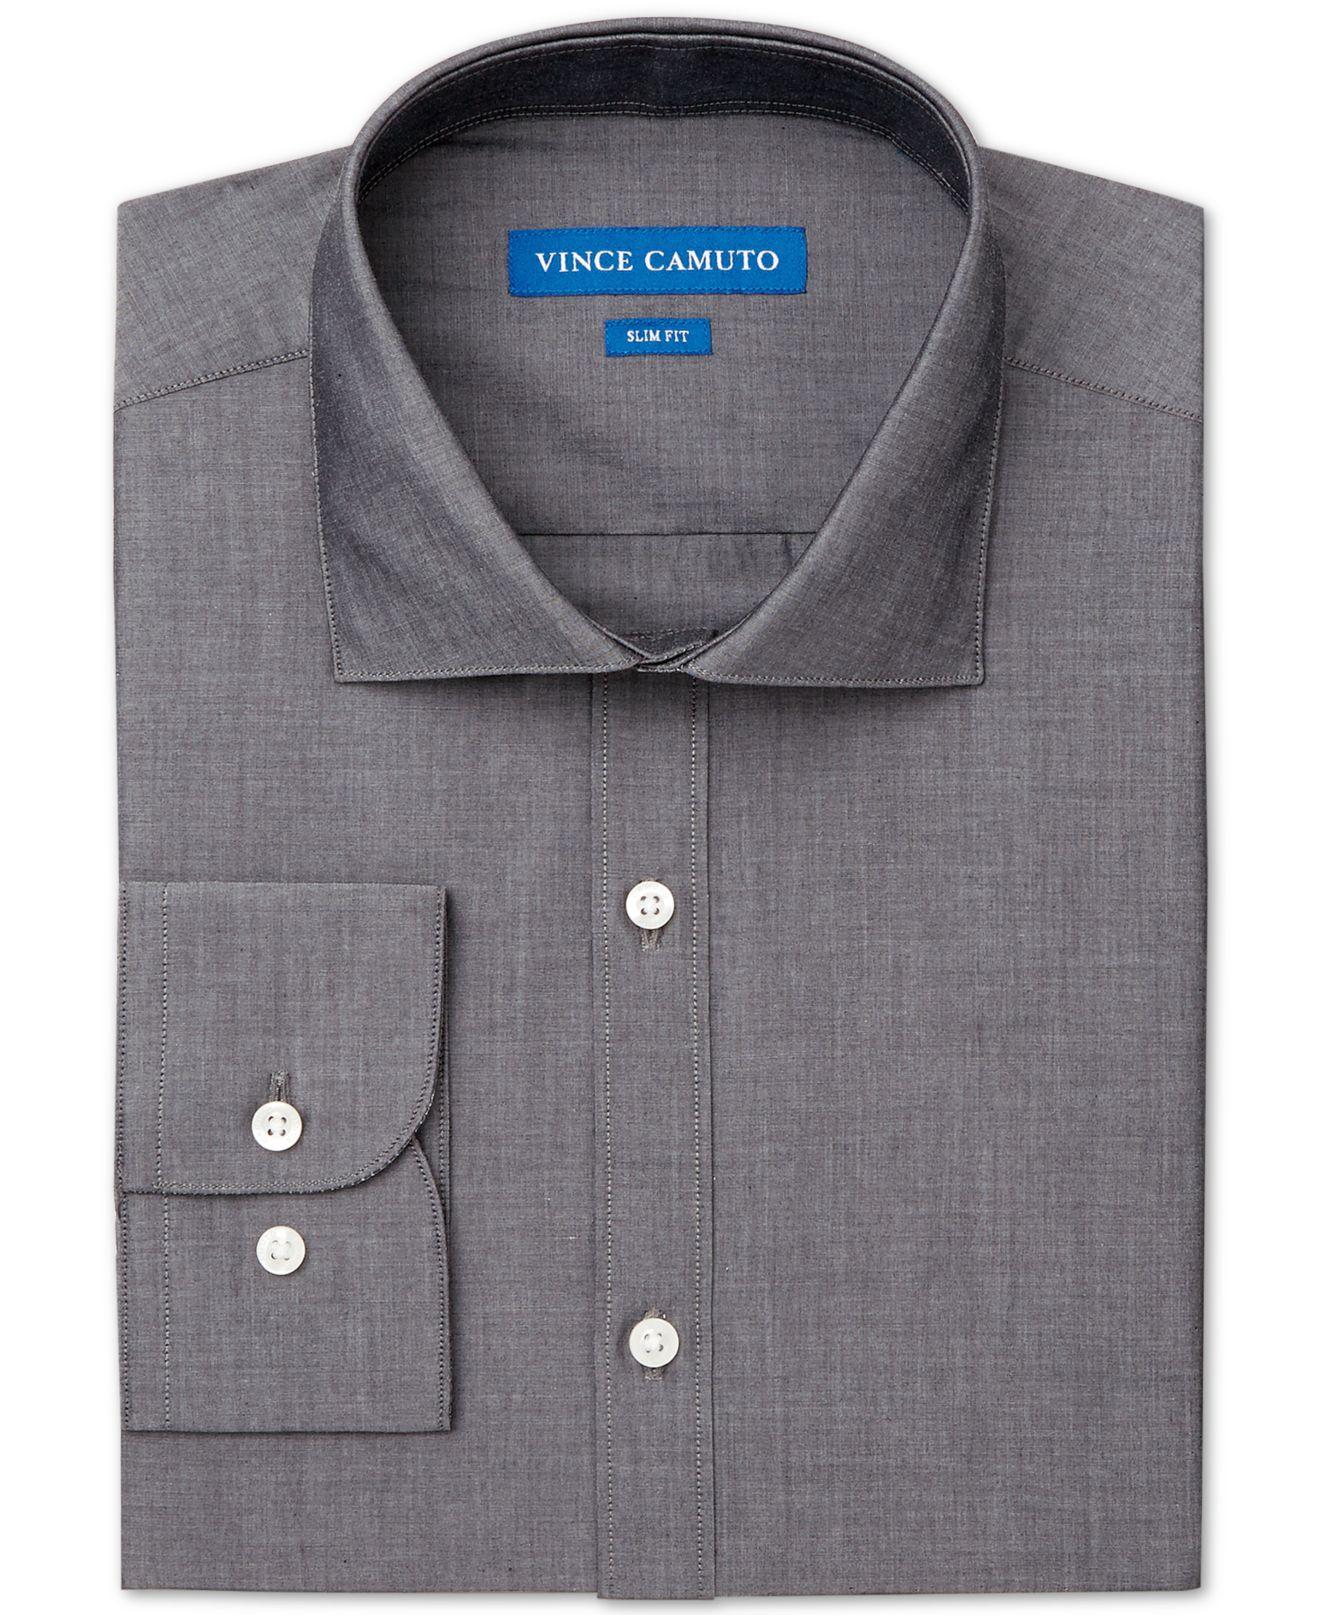 Vince camuto Slim-fit Chambray Solid Dress Shirt in Gray for Men (Slate1) | Lyst